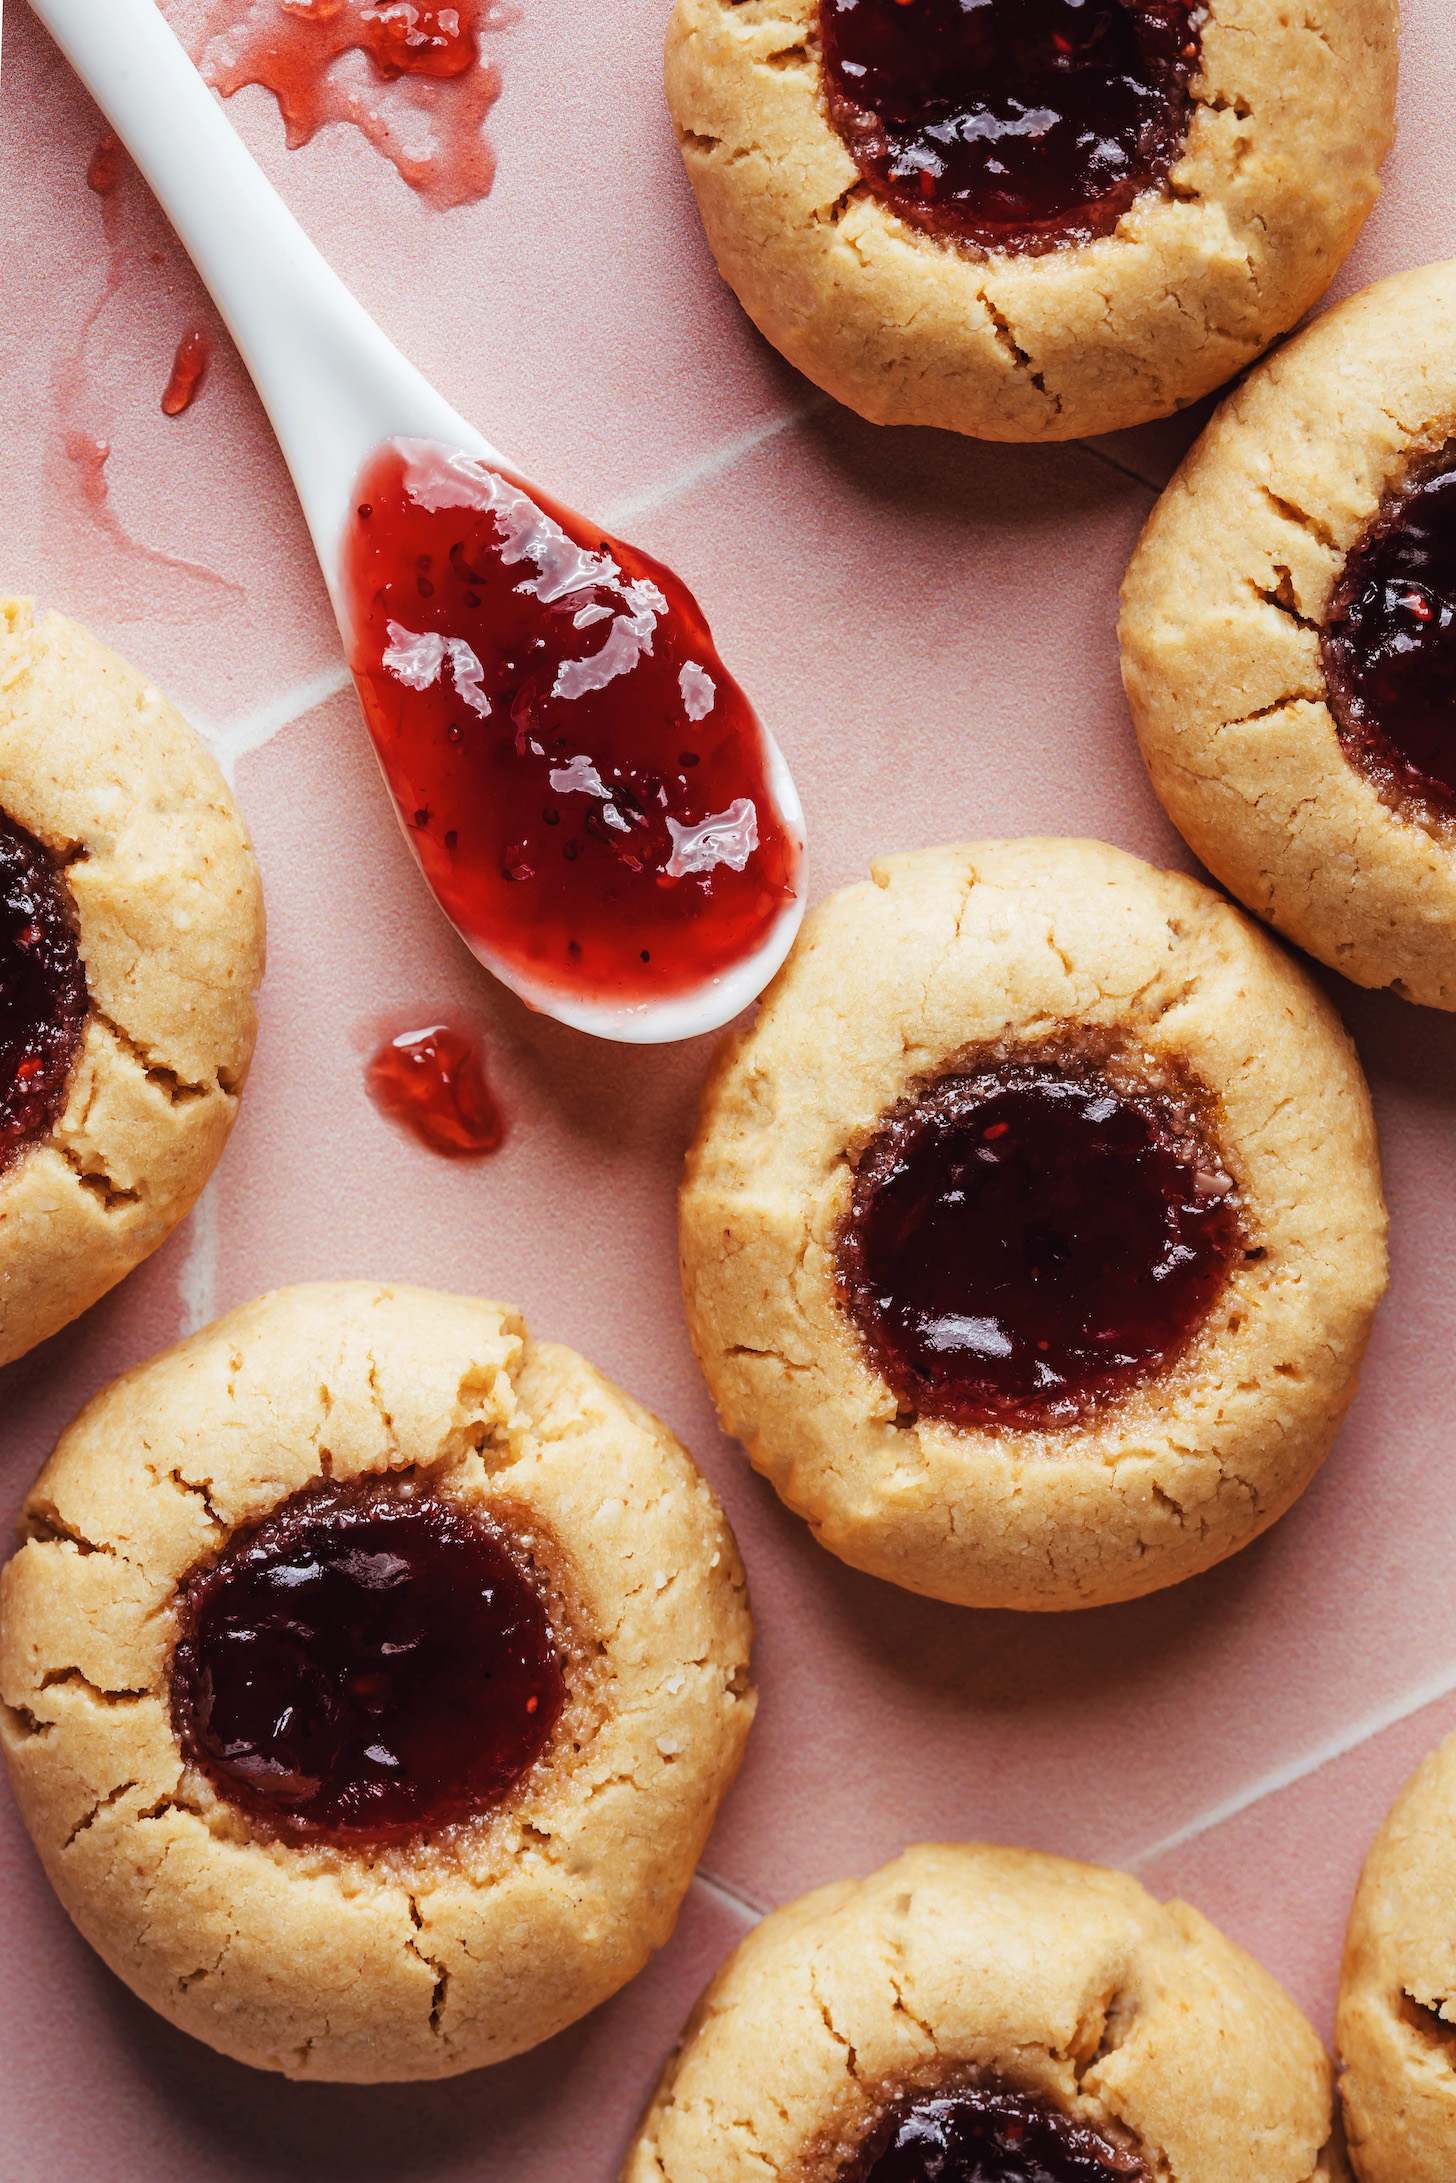 A close-up shot of the raspberry jam center of the Peanut Butter Thumbprint Cookies